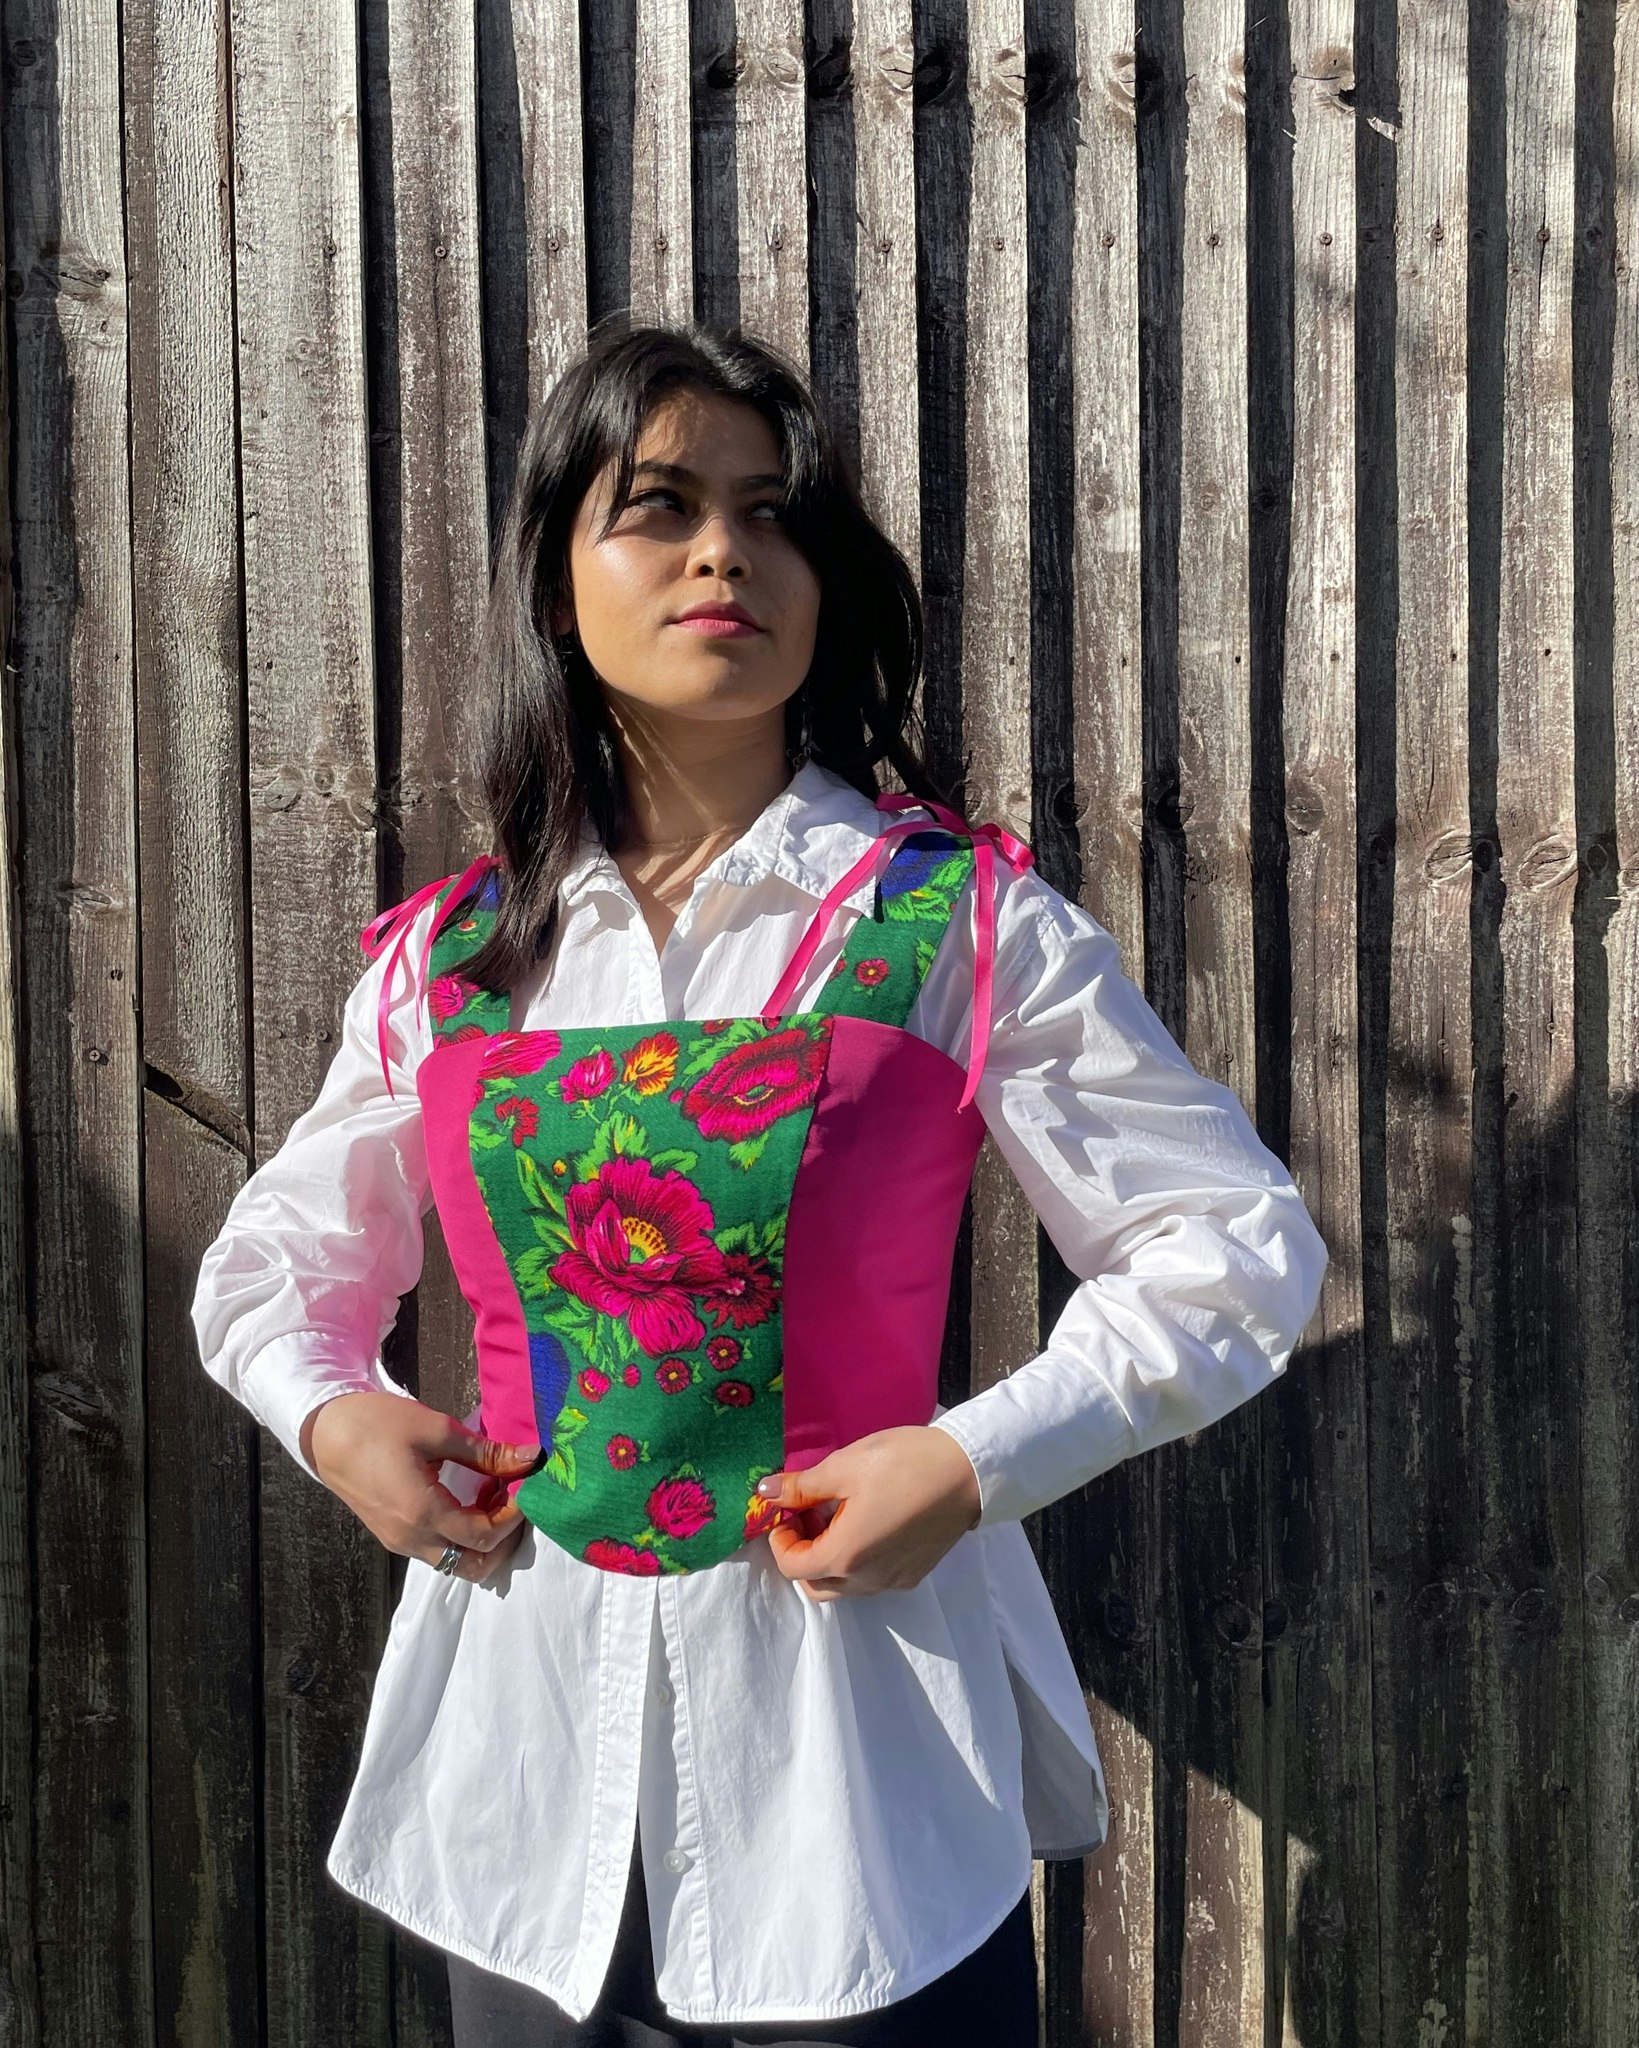 Handmade Benafshe corset top featuring gorgeous traditional Gulnigar fabric with fully lined cotton with an adjustable lace-up back. The name Benafshe is inspired by the spring flower.